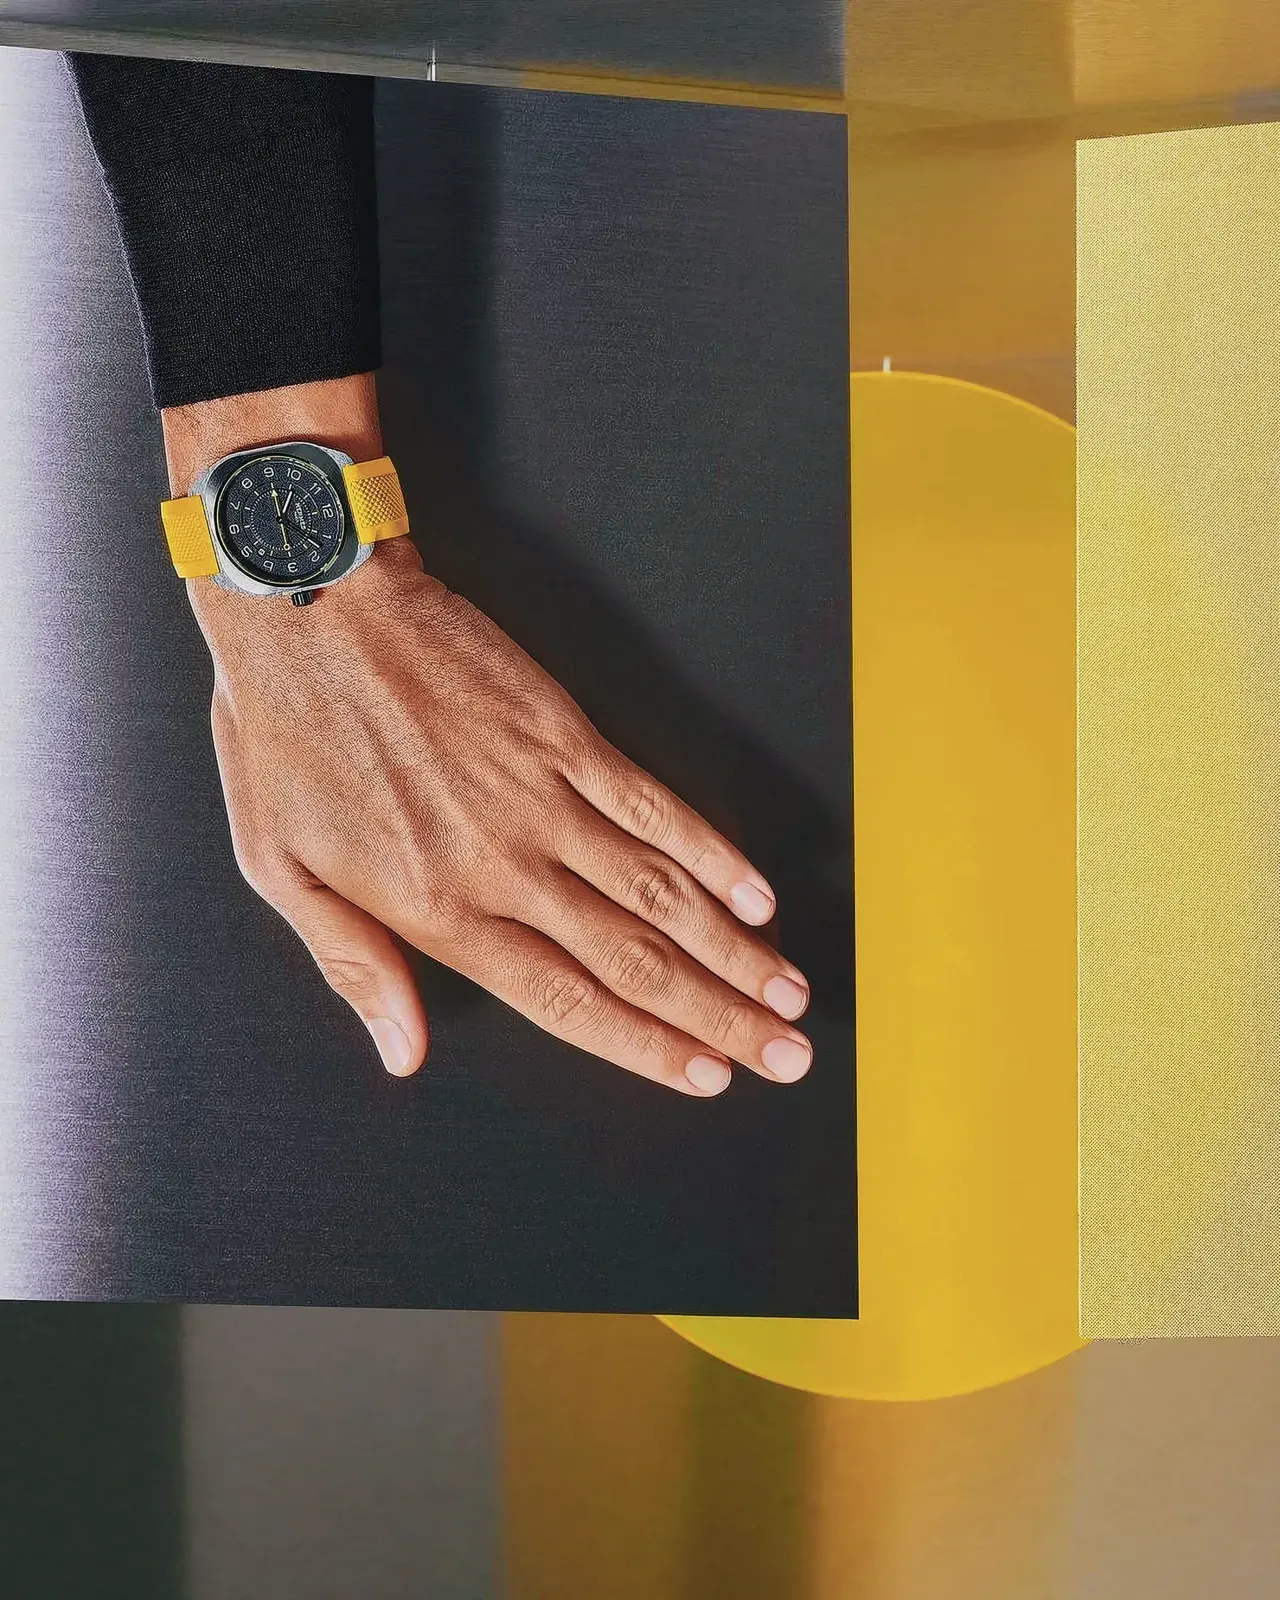 Close-up view of a human hand with a yellow watch on a black surface